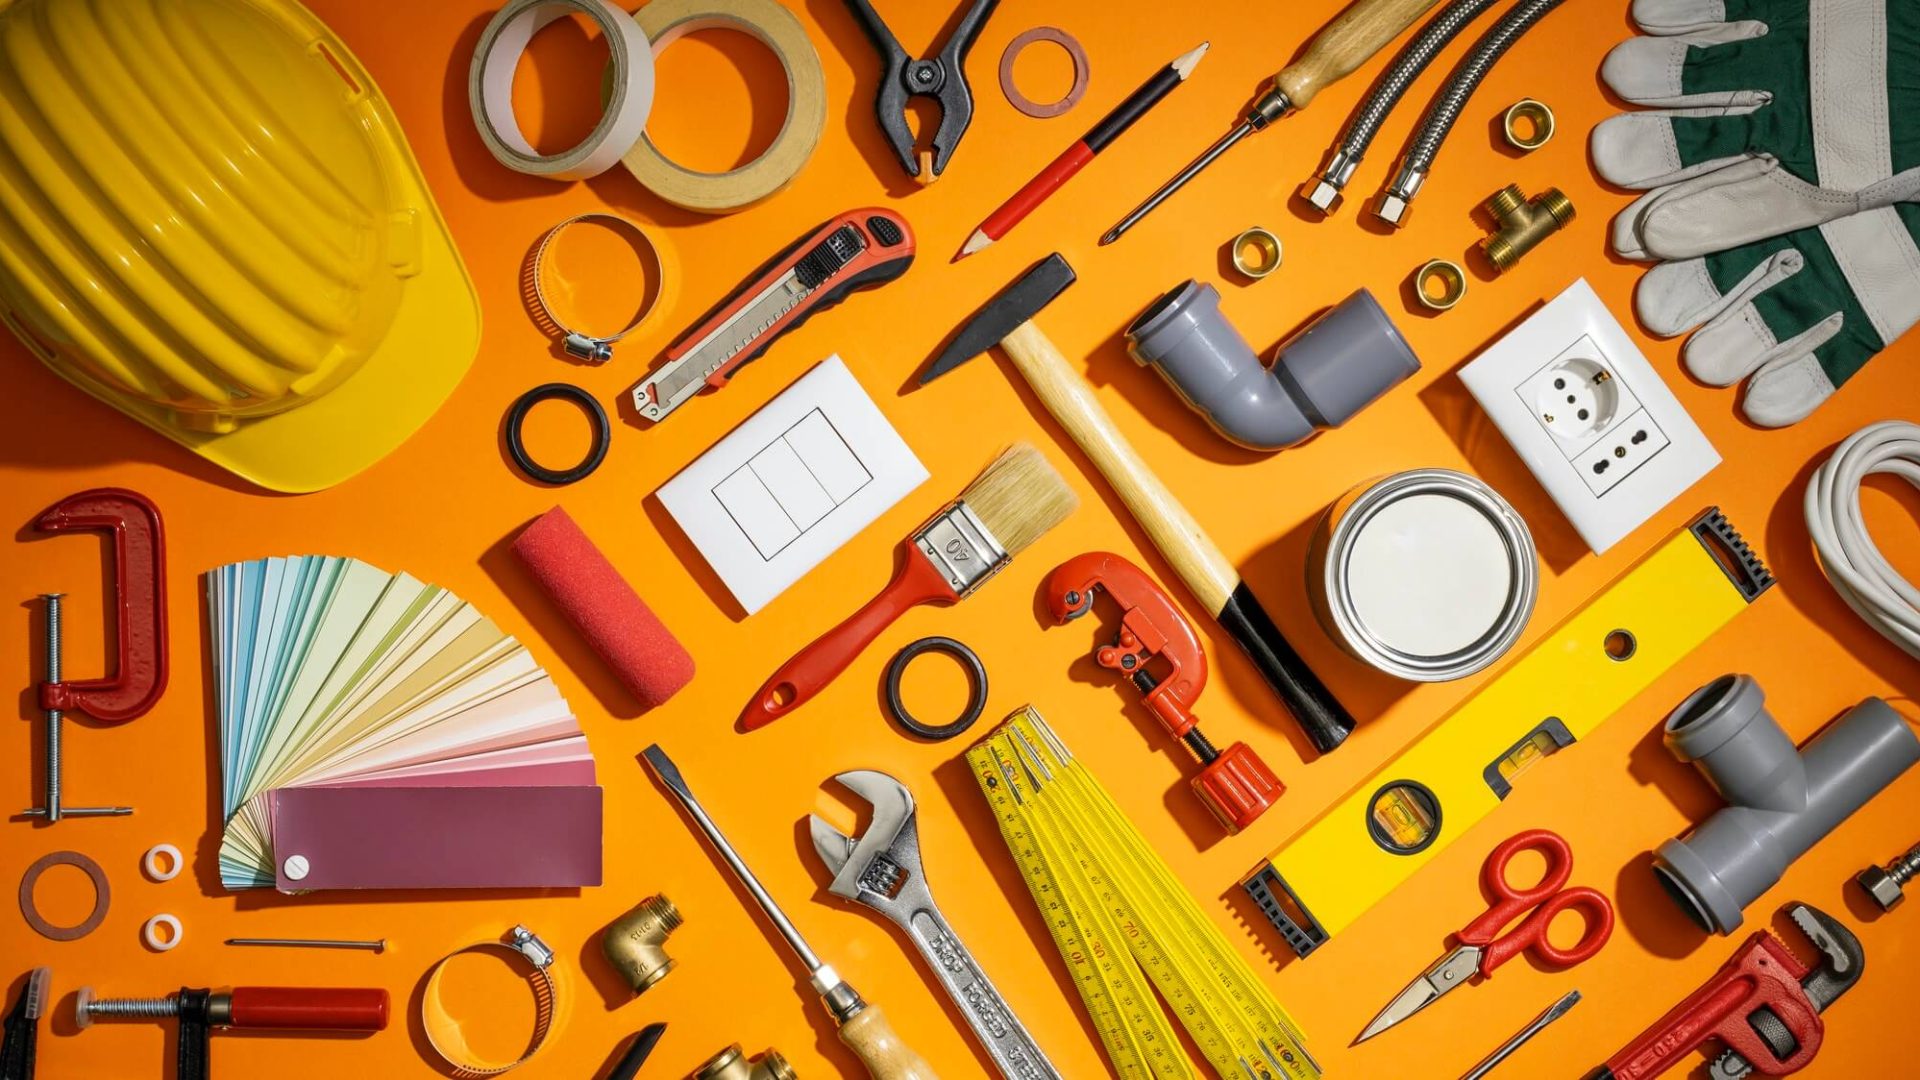 do-it-yourself-and-home-renovation-tools.jpg